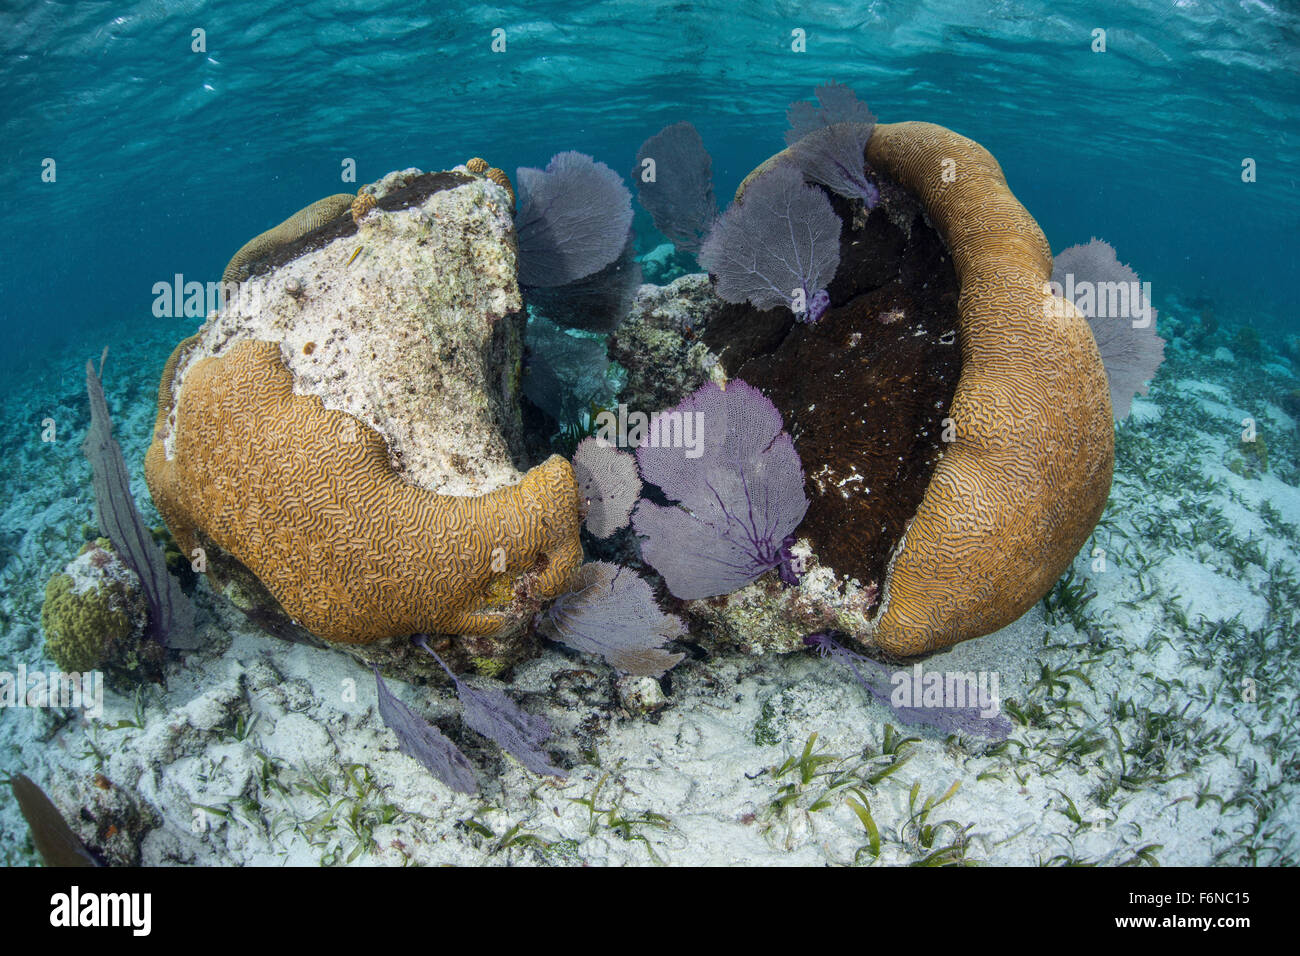 A brain coral and gorgonians grow in shallow water off Turneffe Atoll in Belize. This part of Central America is well known for Stock Photo